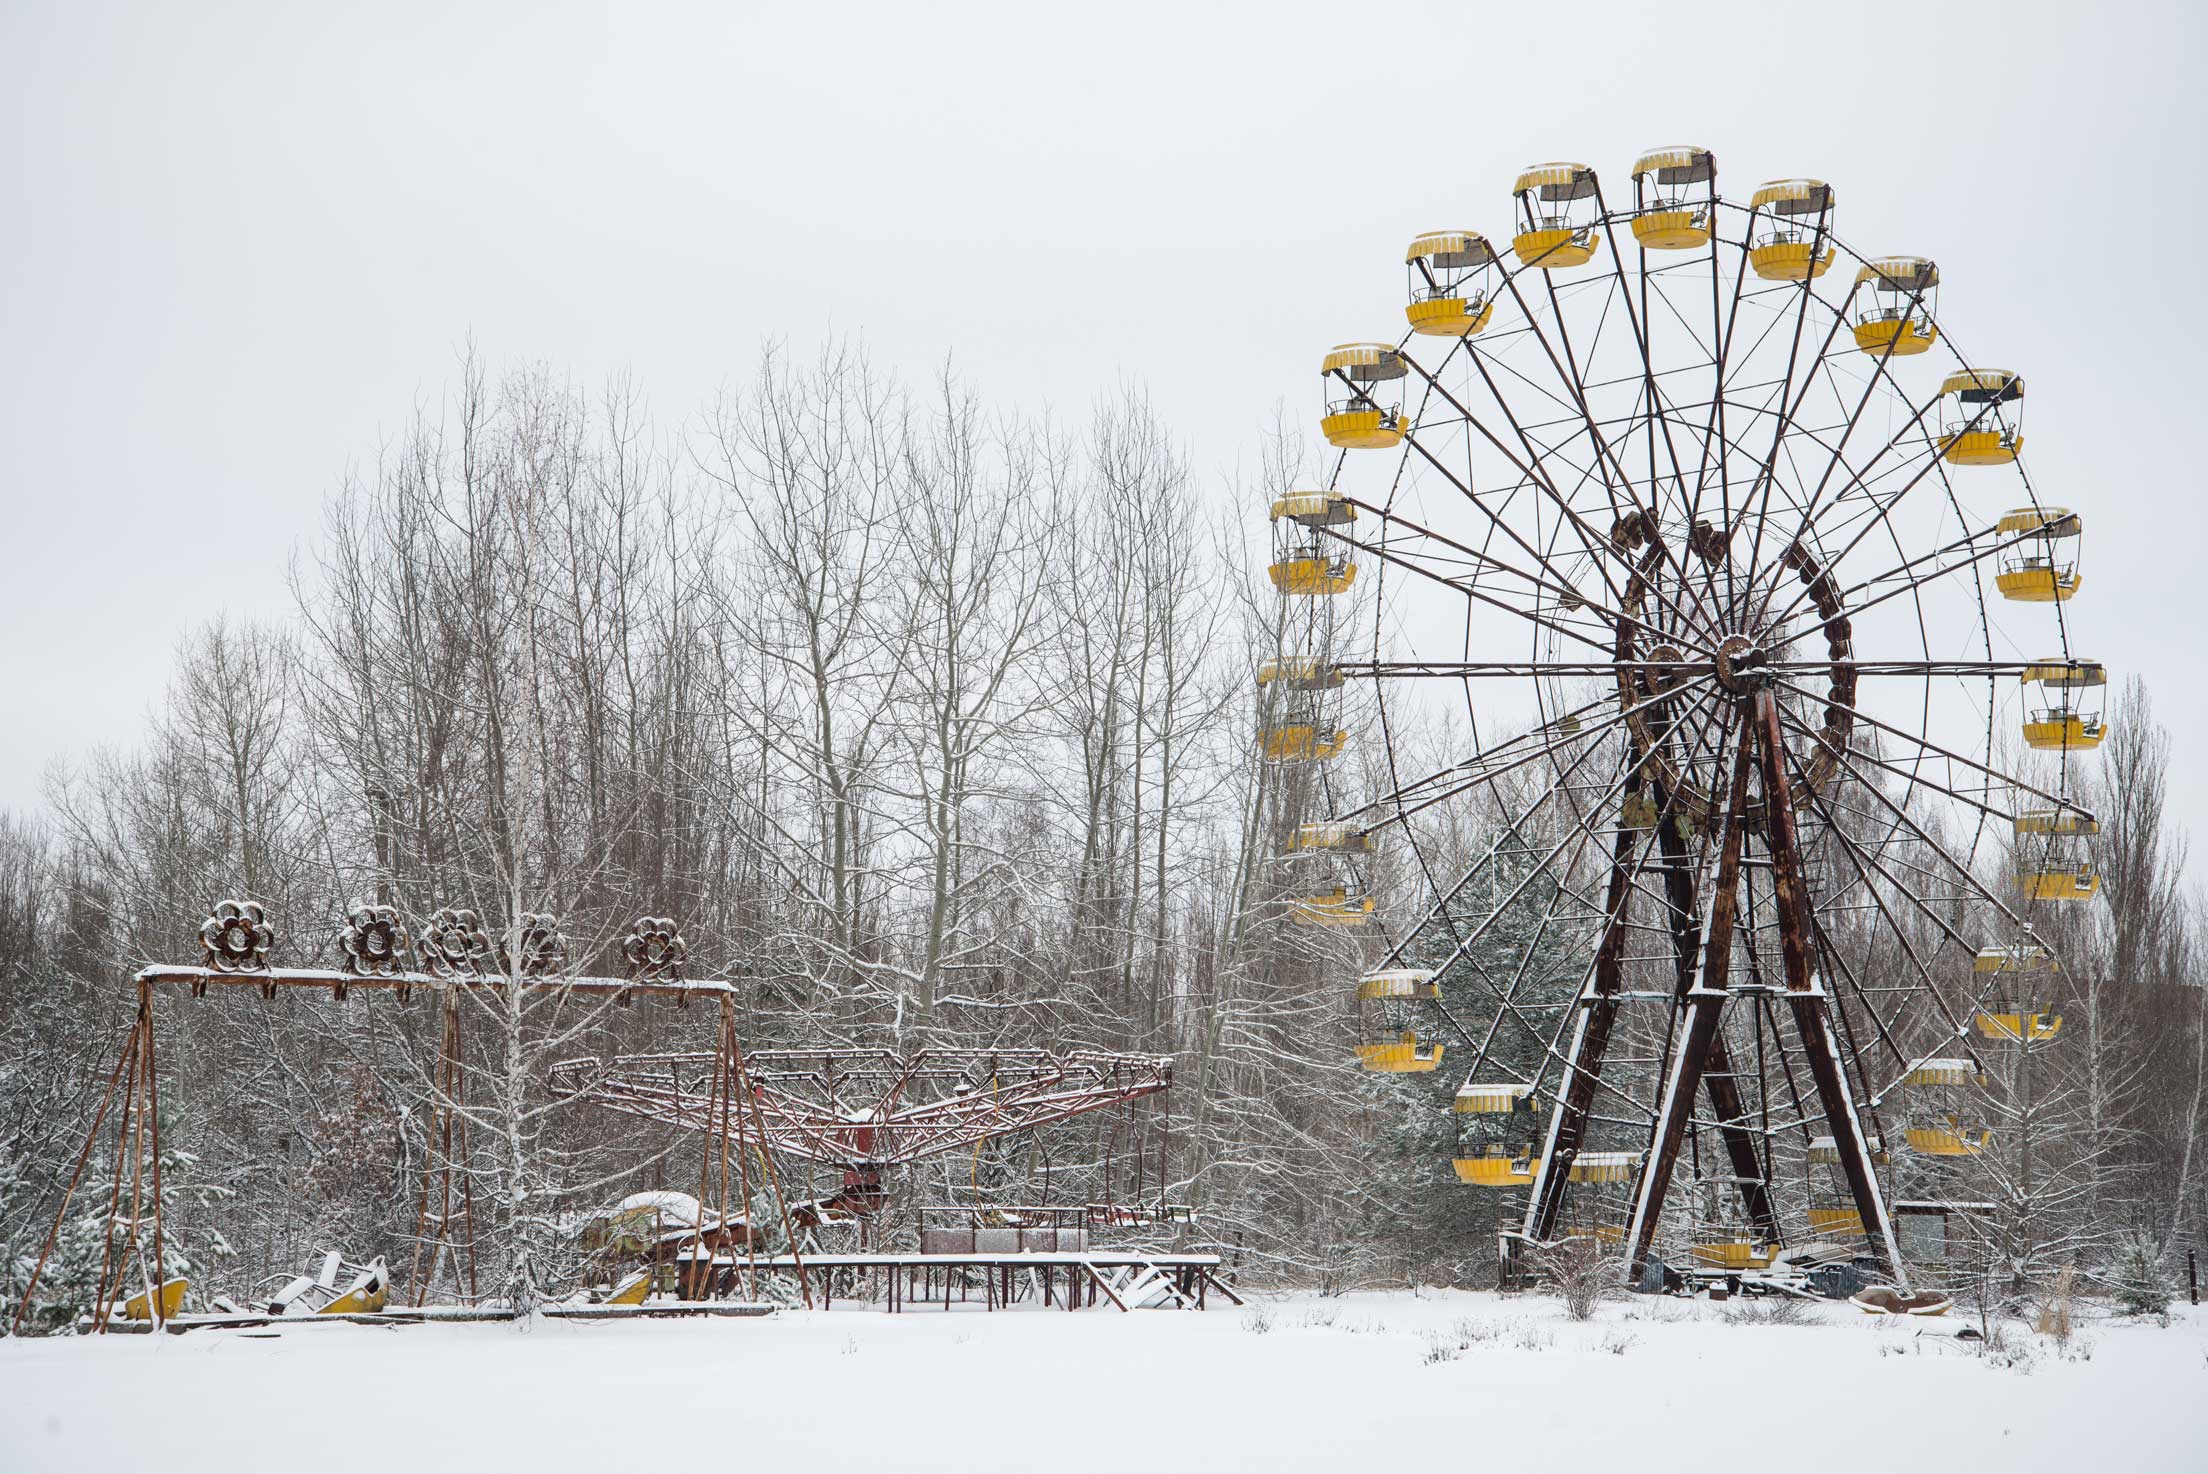 Abandoned park and ferris wheel in a snowy landscape and bare trees in Chernobyl, Russia